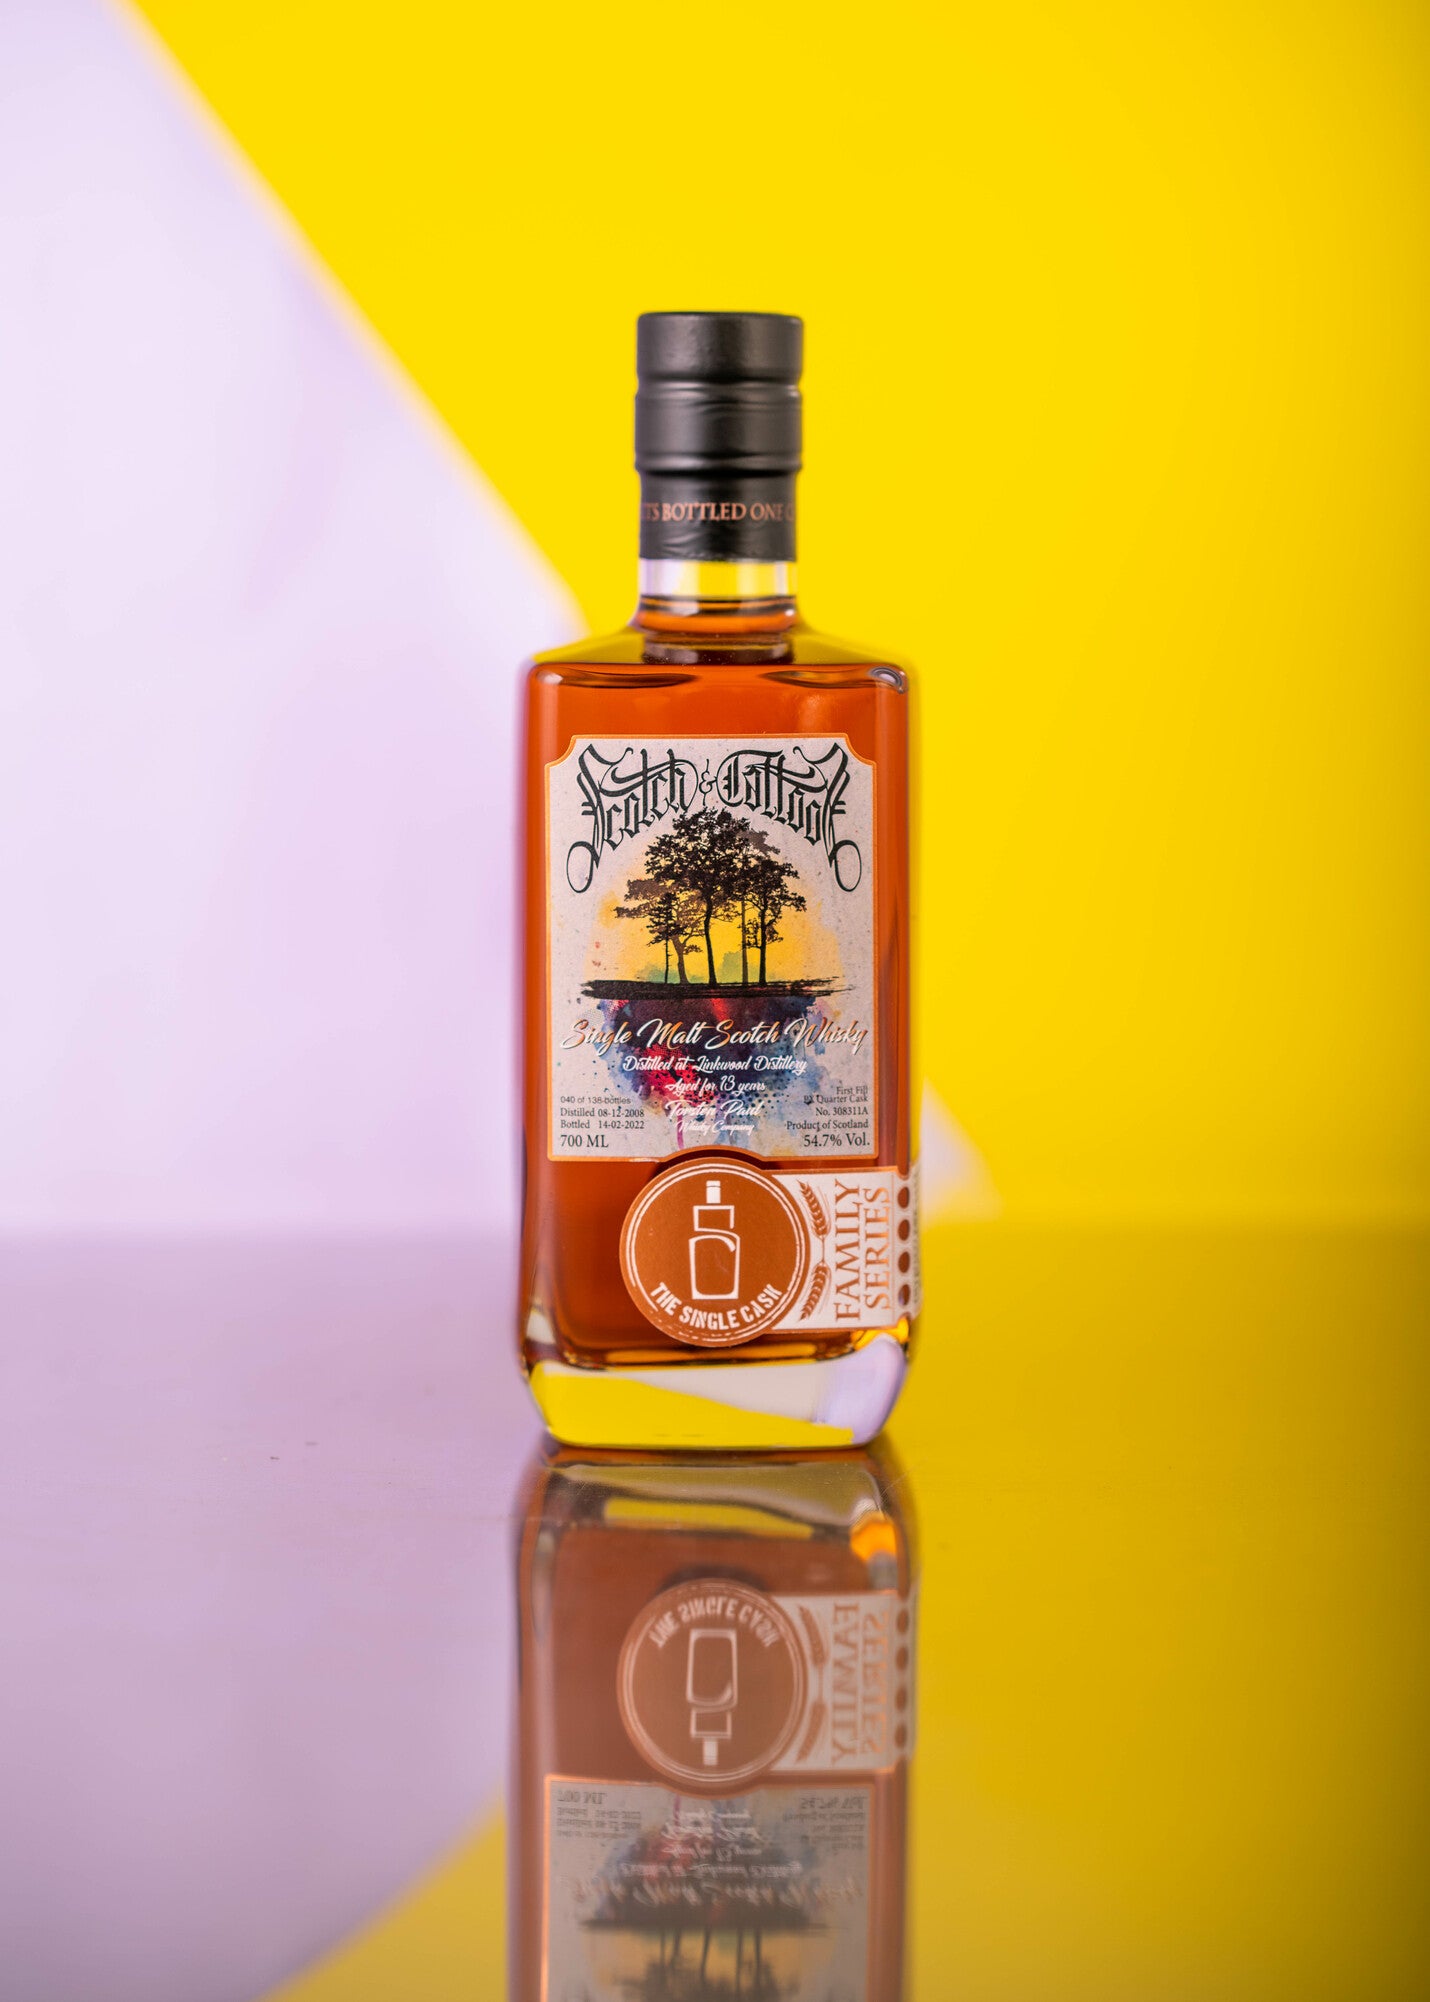 Linkwood single cask scotch whisky from scotch and tattoos